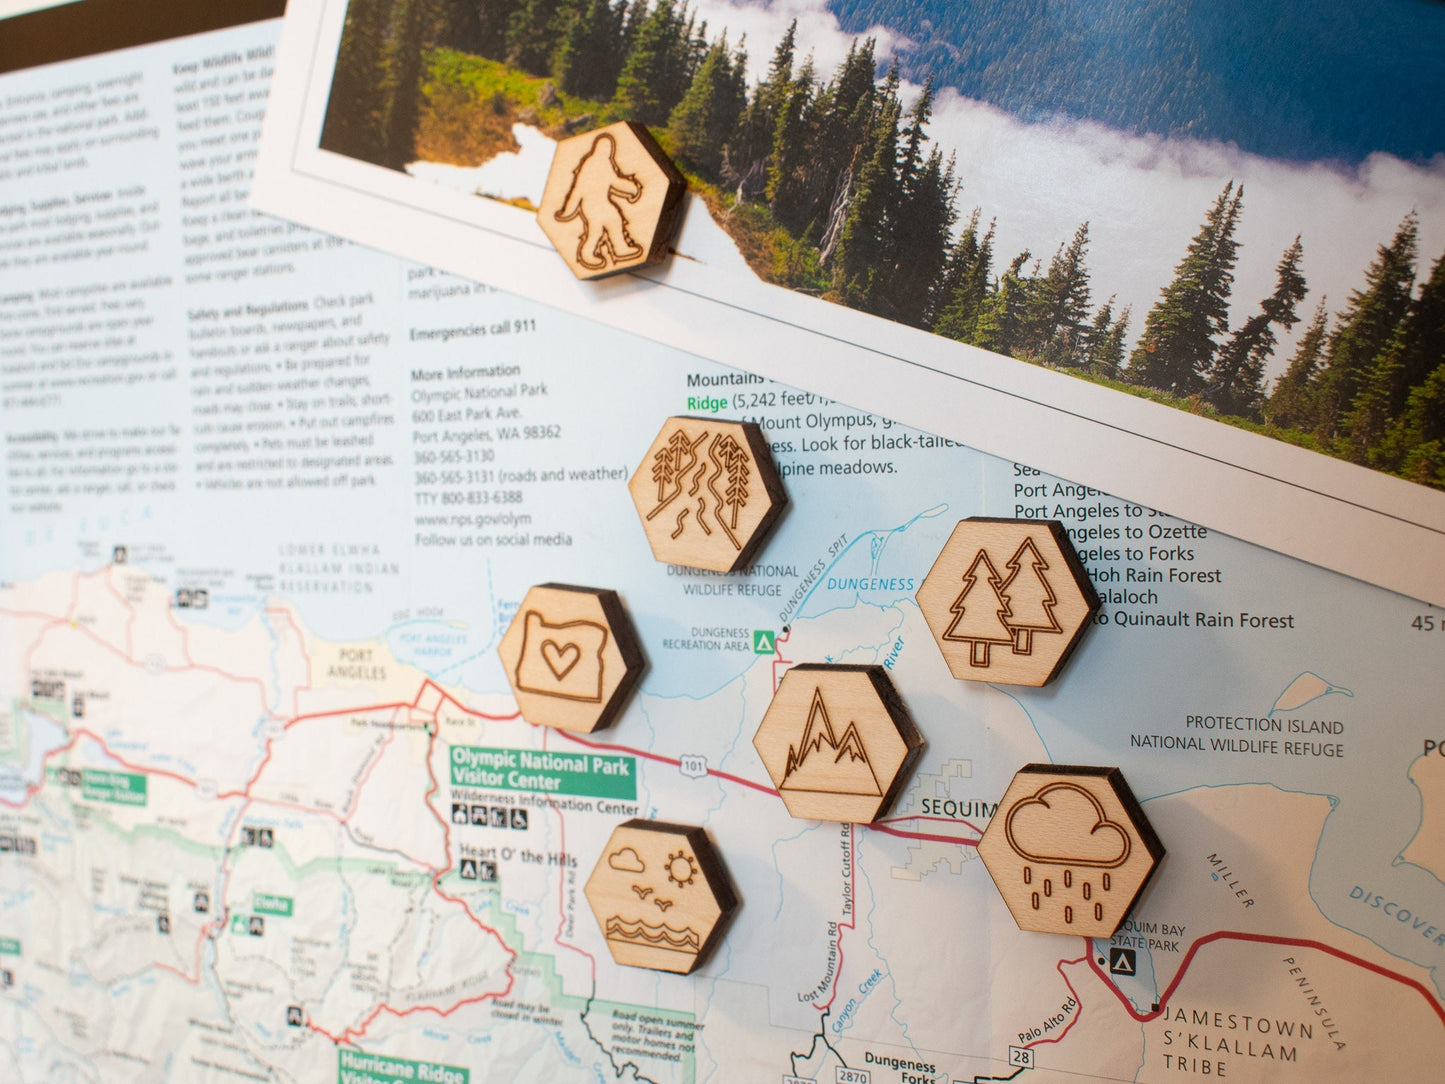 Oregon Magnets, Small Wood Magnets with Pictures Representing Oregon/PNW (Pacific Northwest)